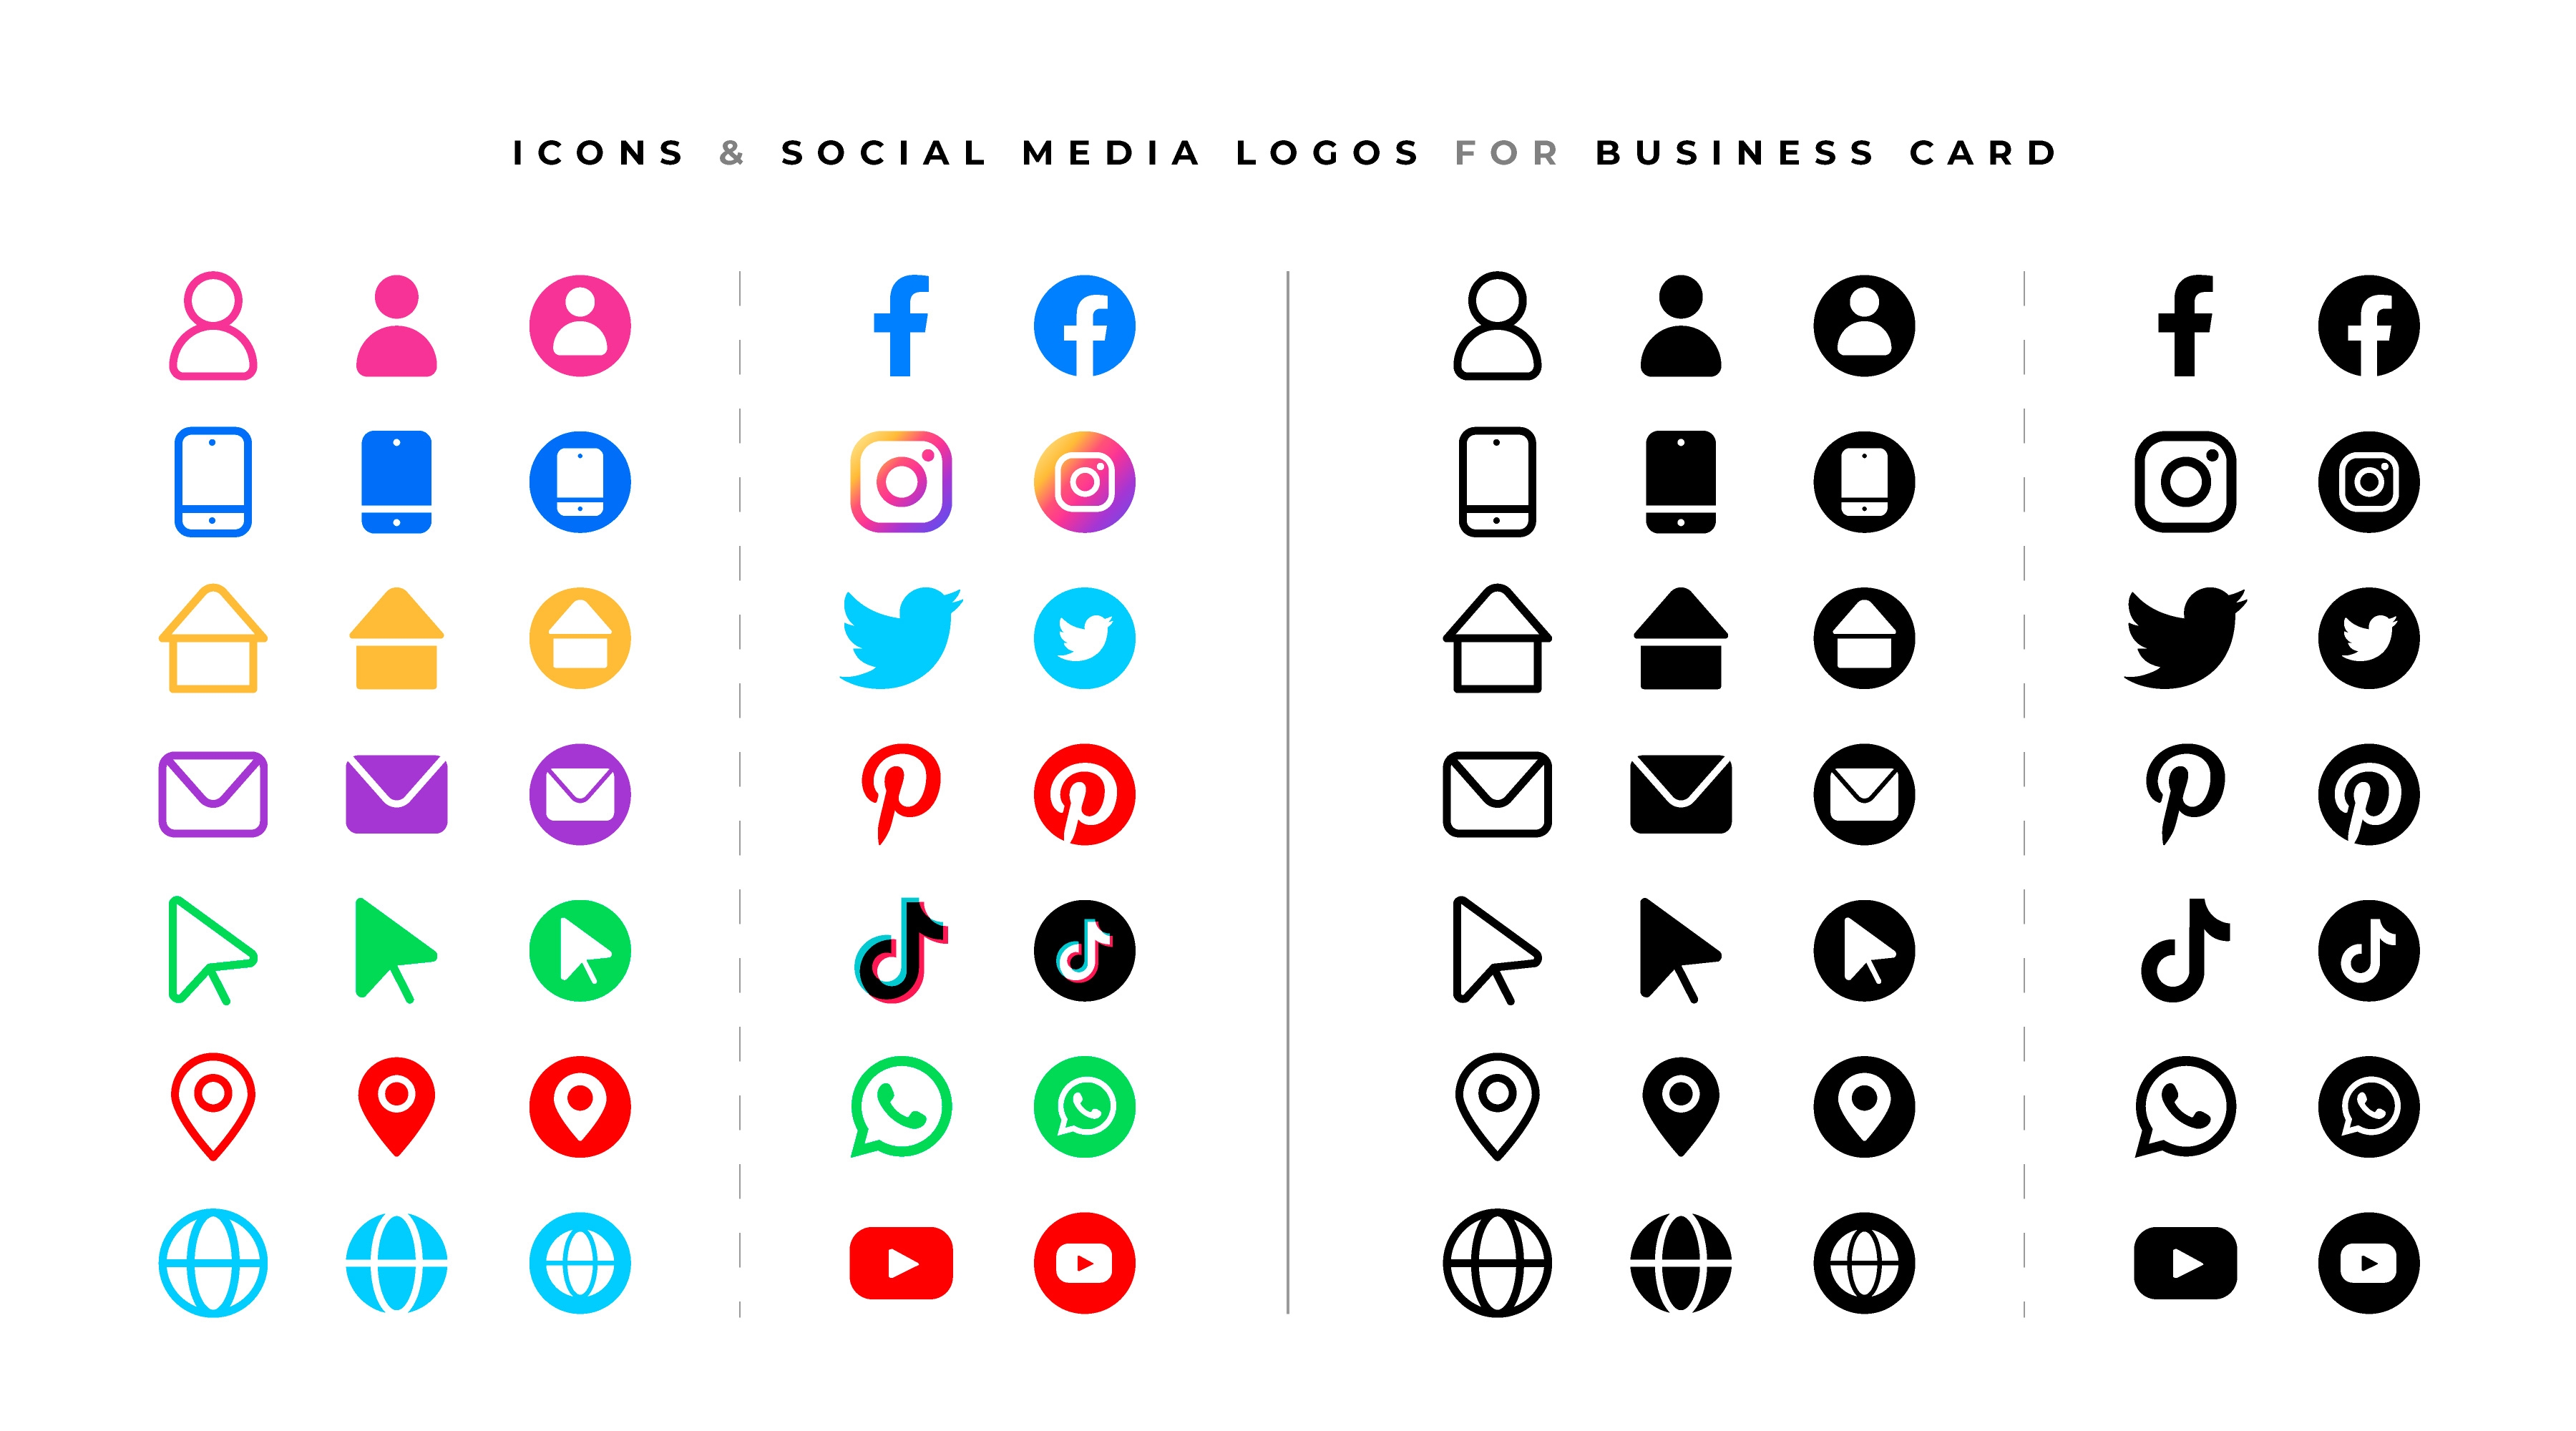 Icons and social media logos collection for business cards and webs